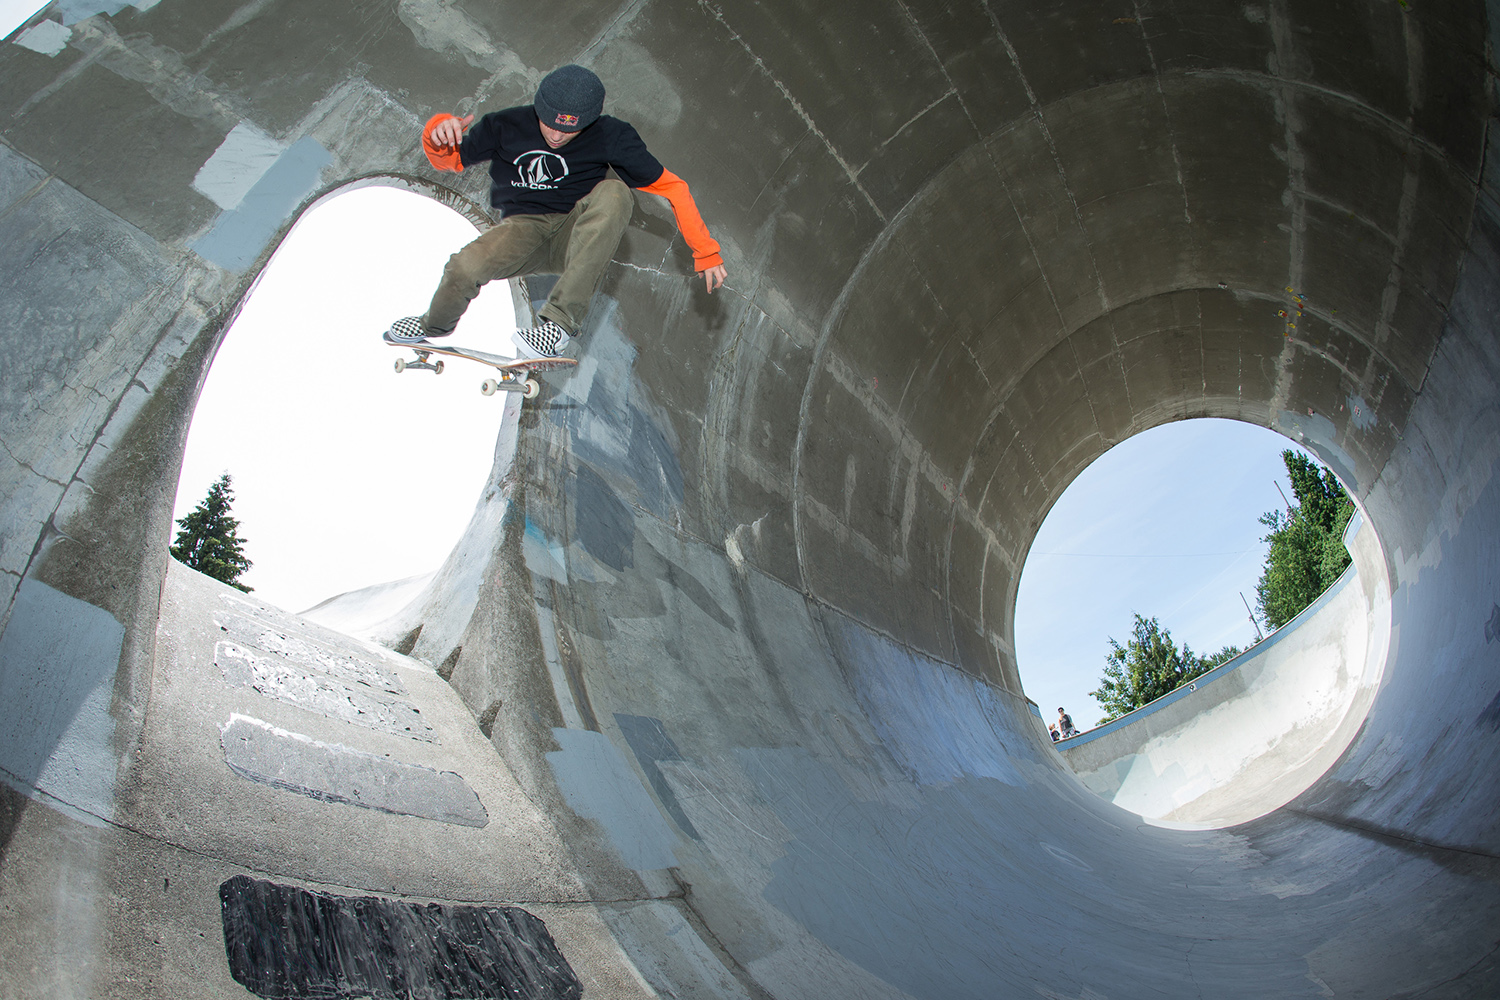  Visiting professional skater CJ Collins clears Pier Park’s full pipe mouse hole with an impressive backside 360. 